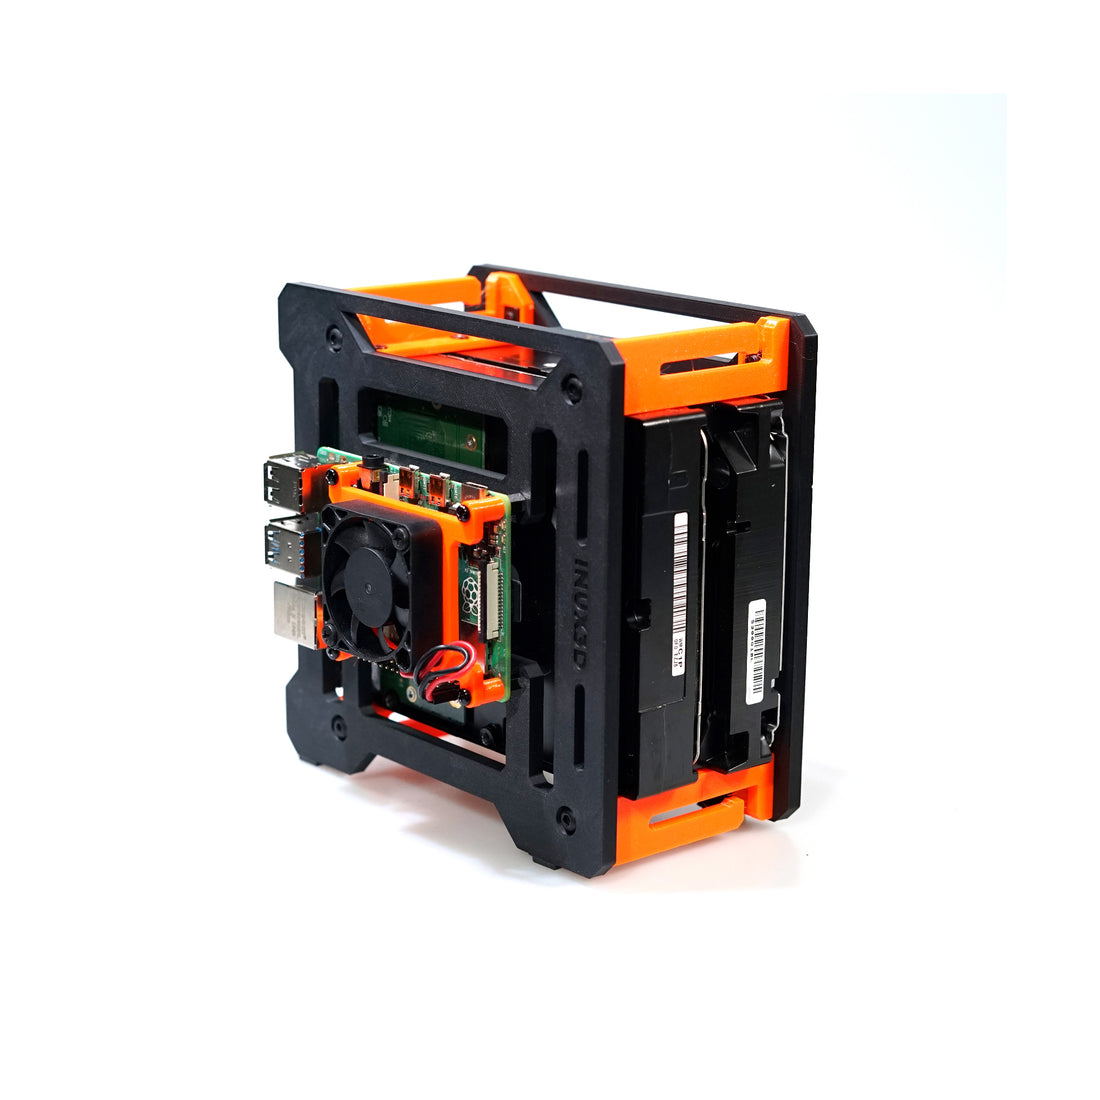 TerraPi Xtreme Duo Open Frame Case for Raspberry Pi and 2x 3.5" HDD Drives 3D Print File